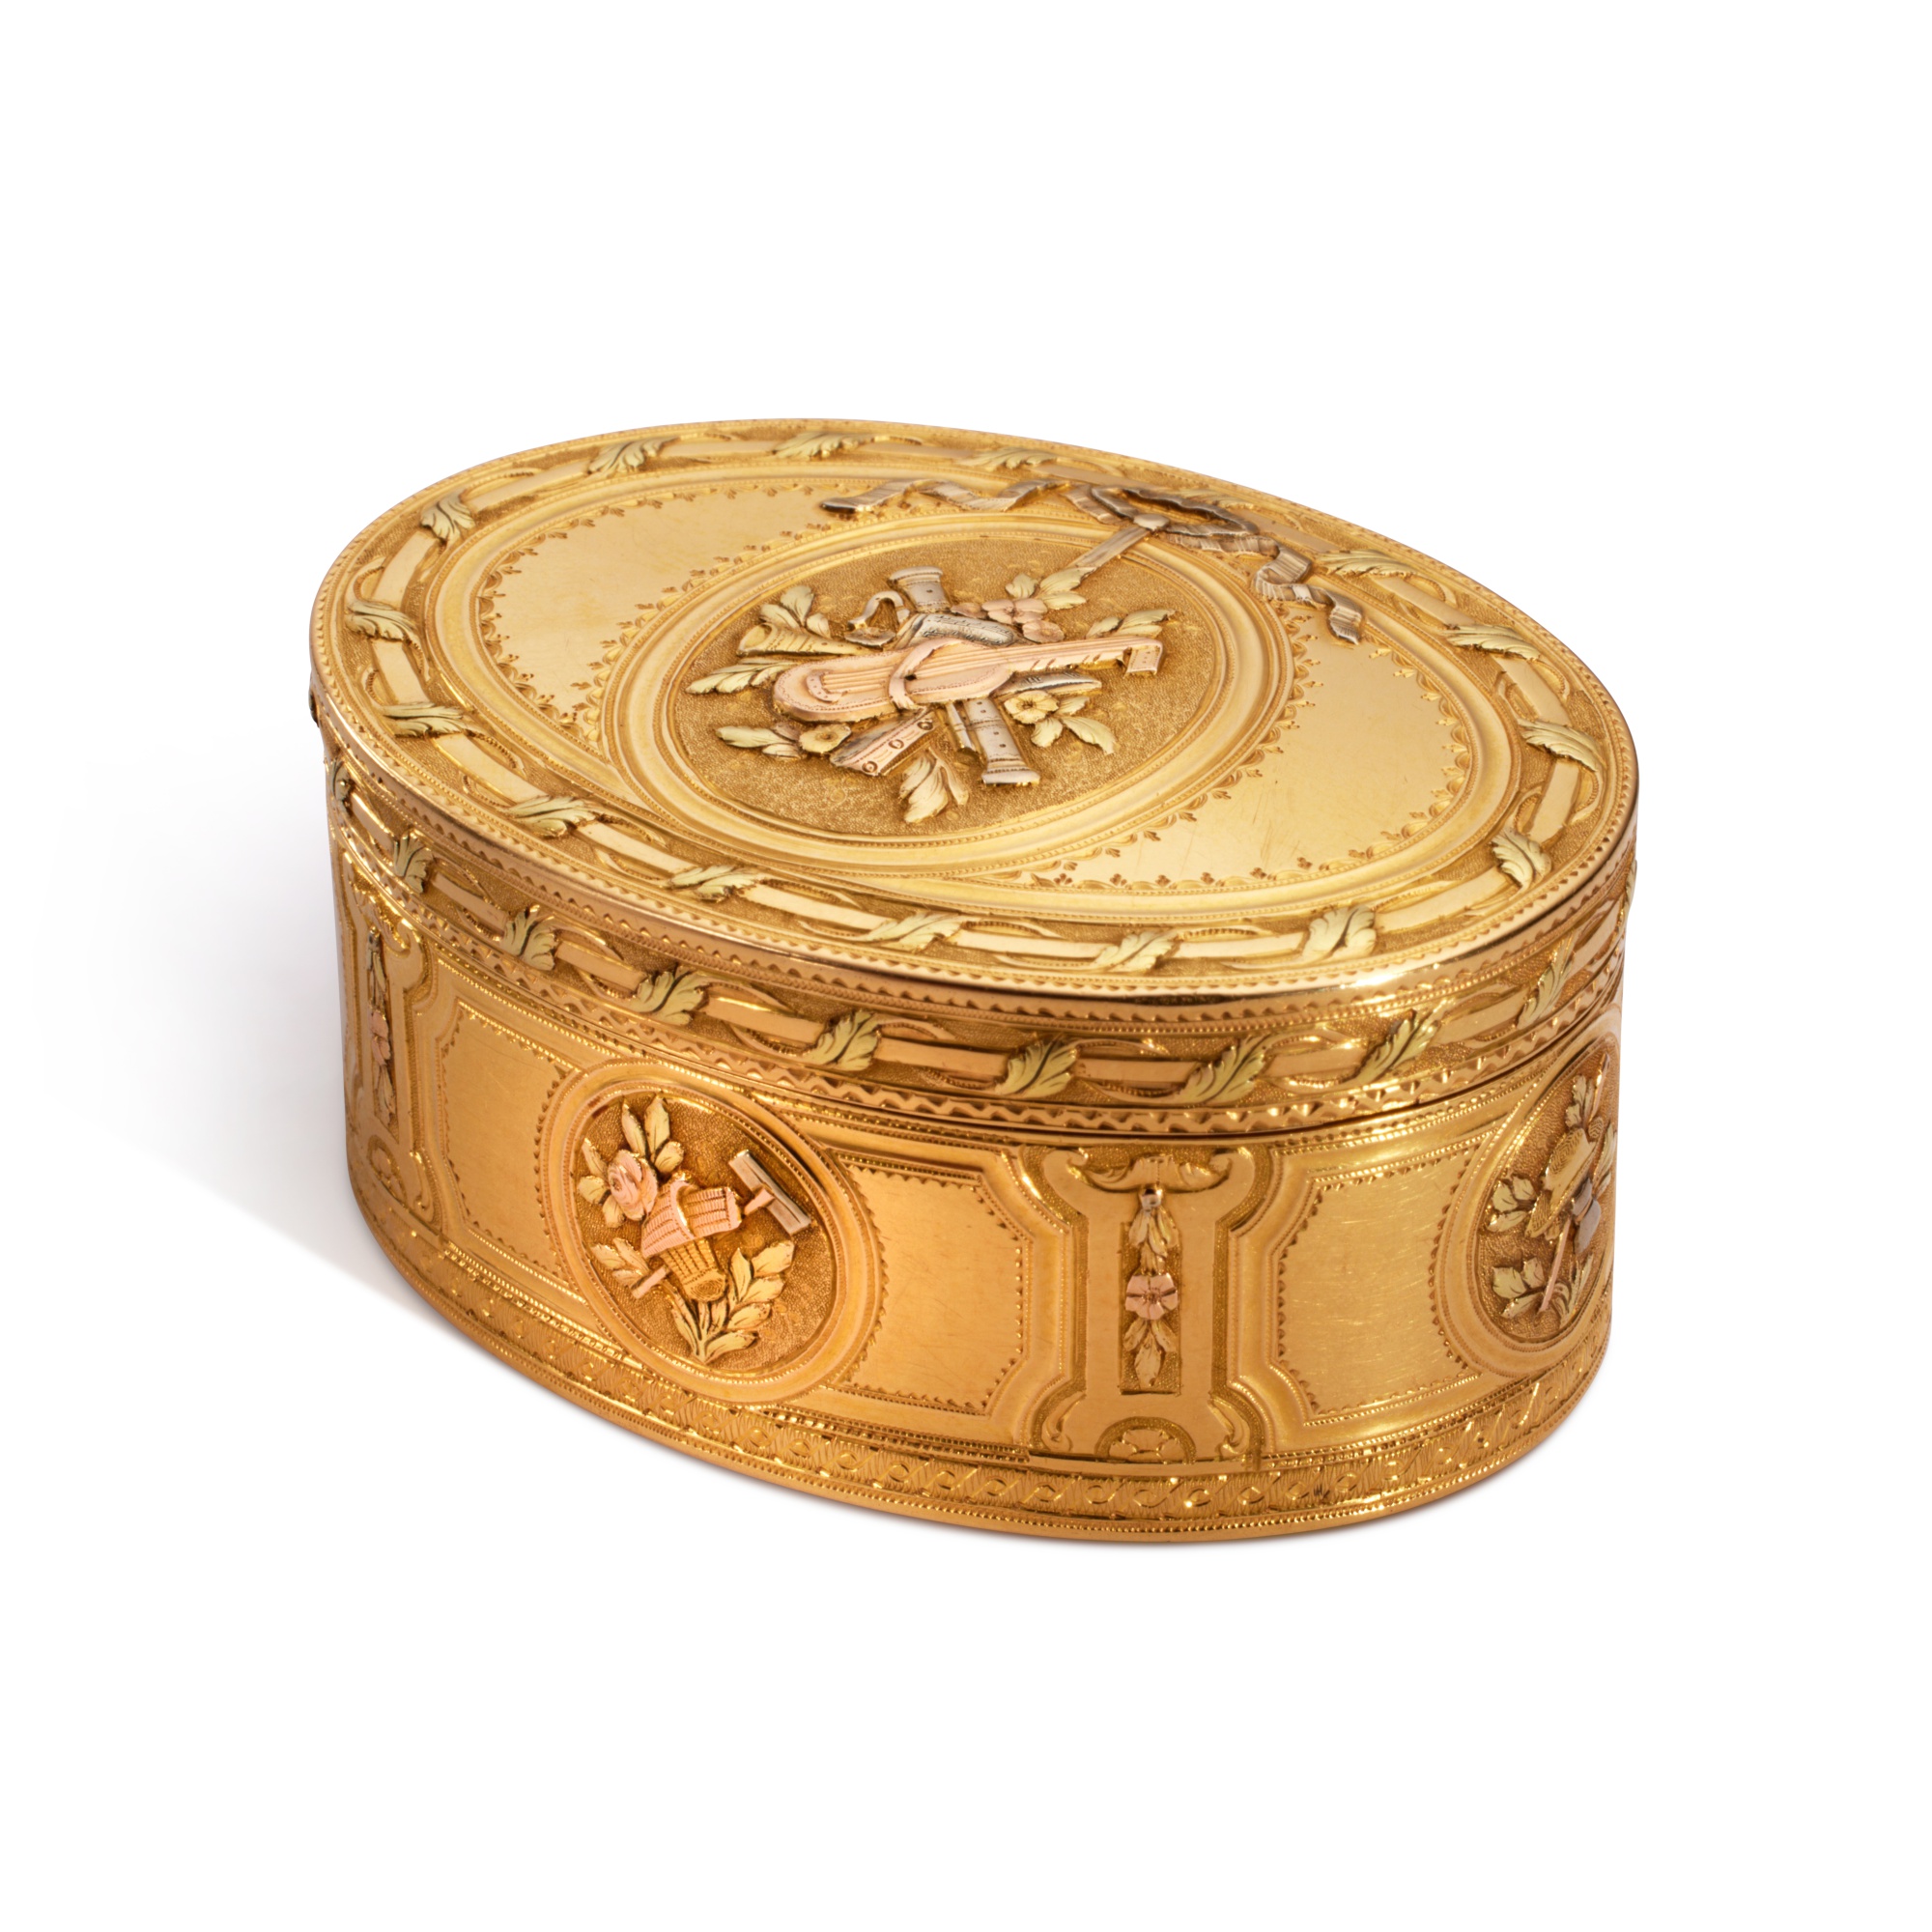 A Louis XV Vari-Color Gold Oval Snuff Box, Pierre-Fran&#231;ois Royer, Paris, 1769, with the Charge - Image 4 of 5